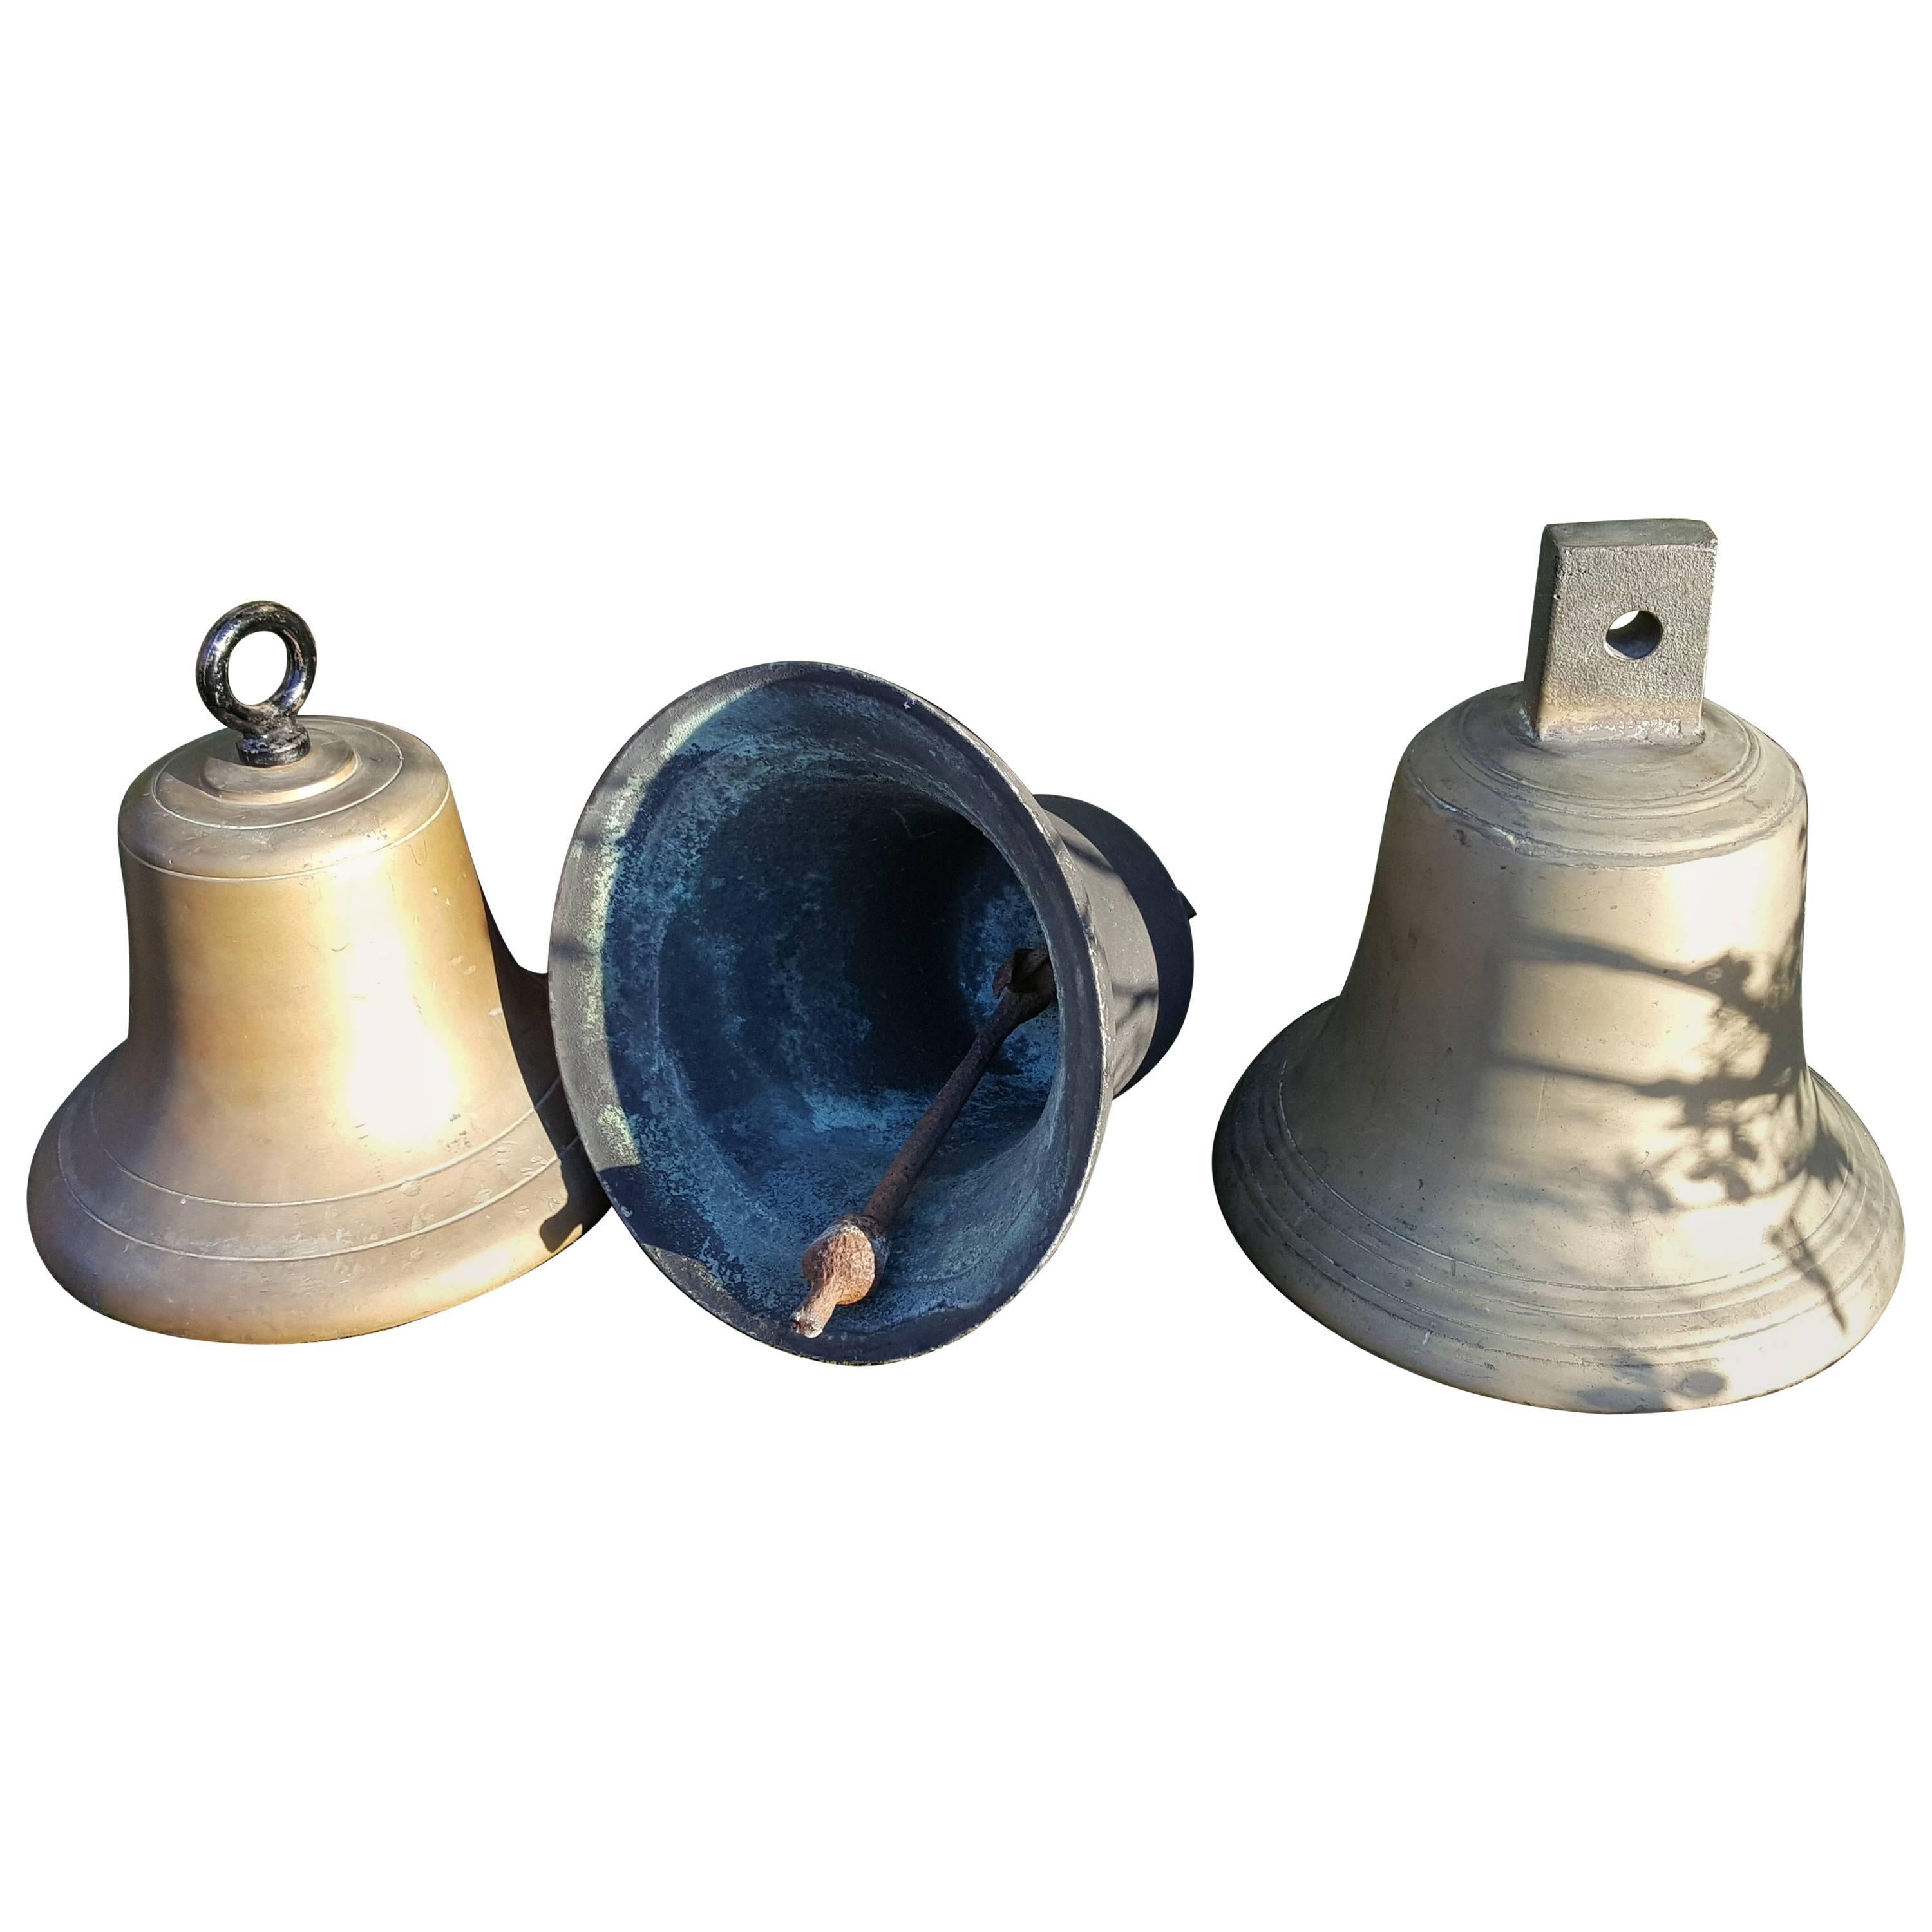 Collection of Three Bronze Bells